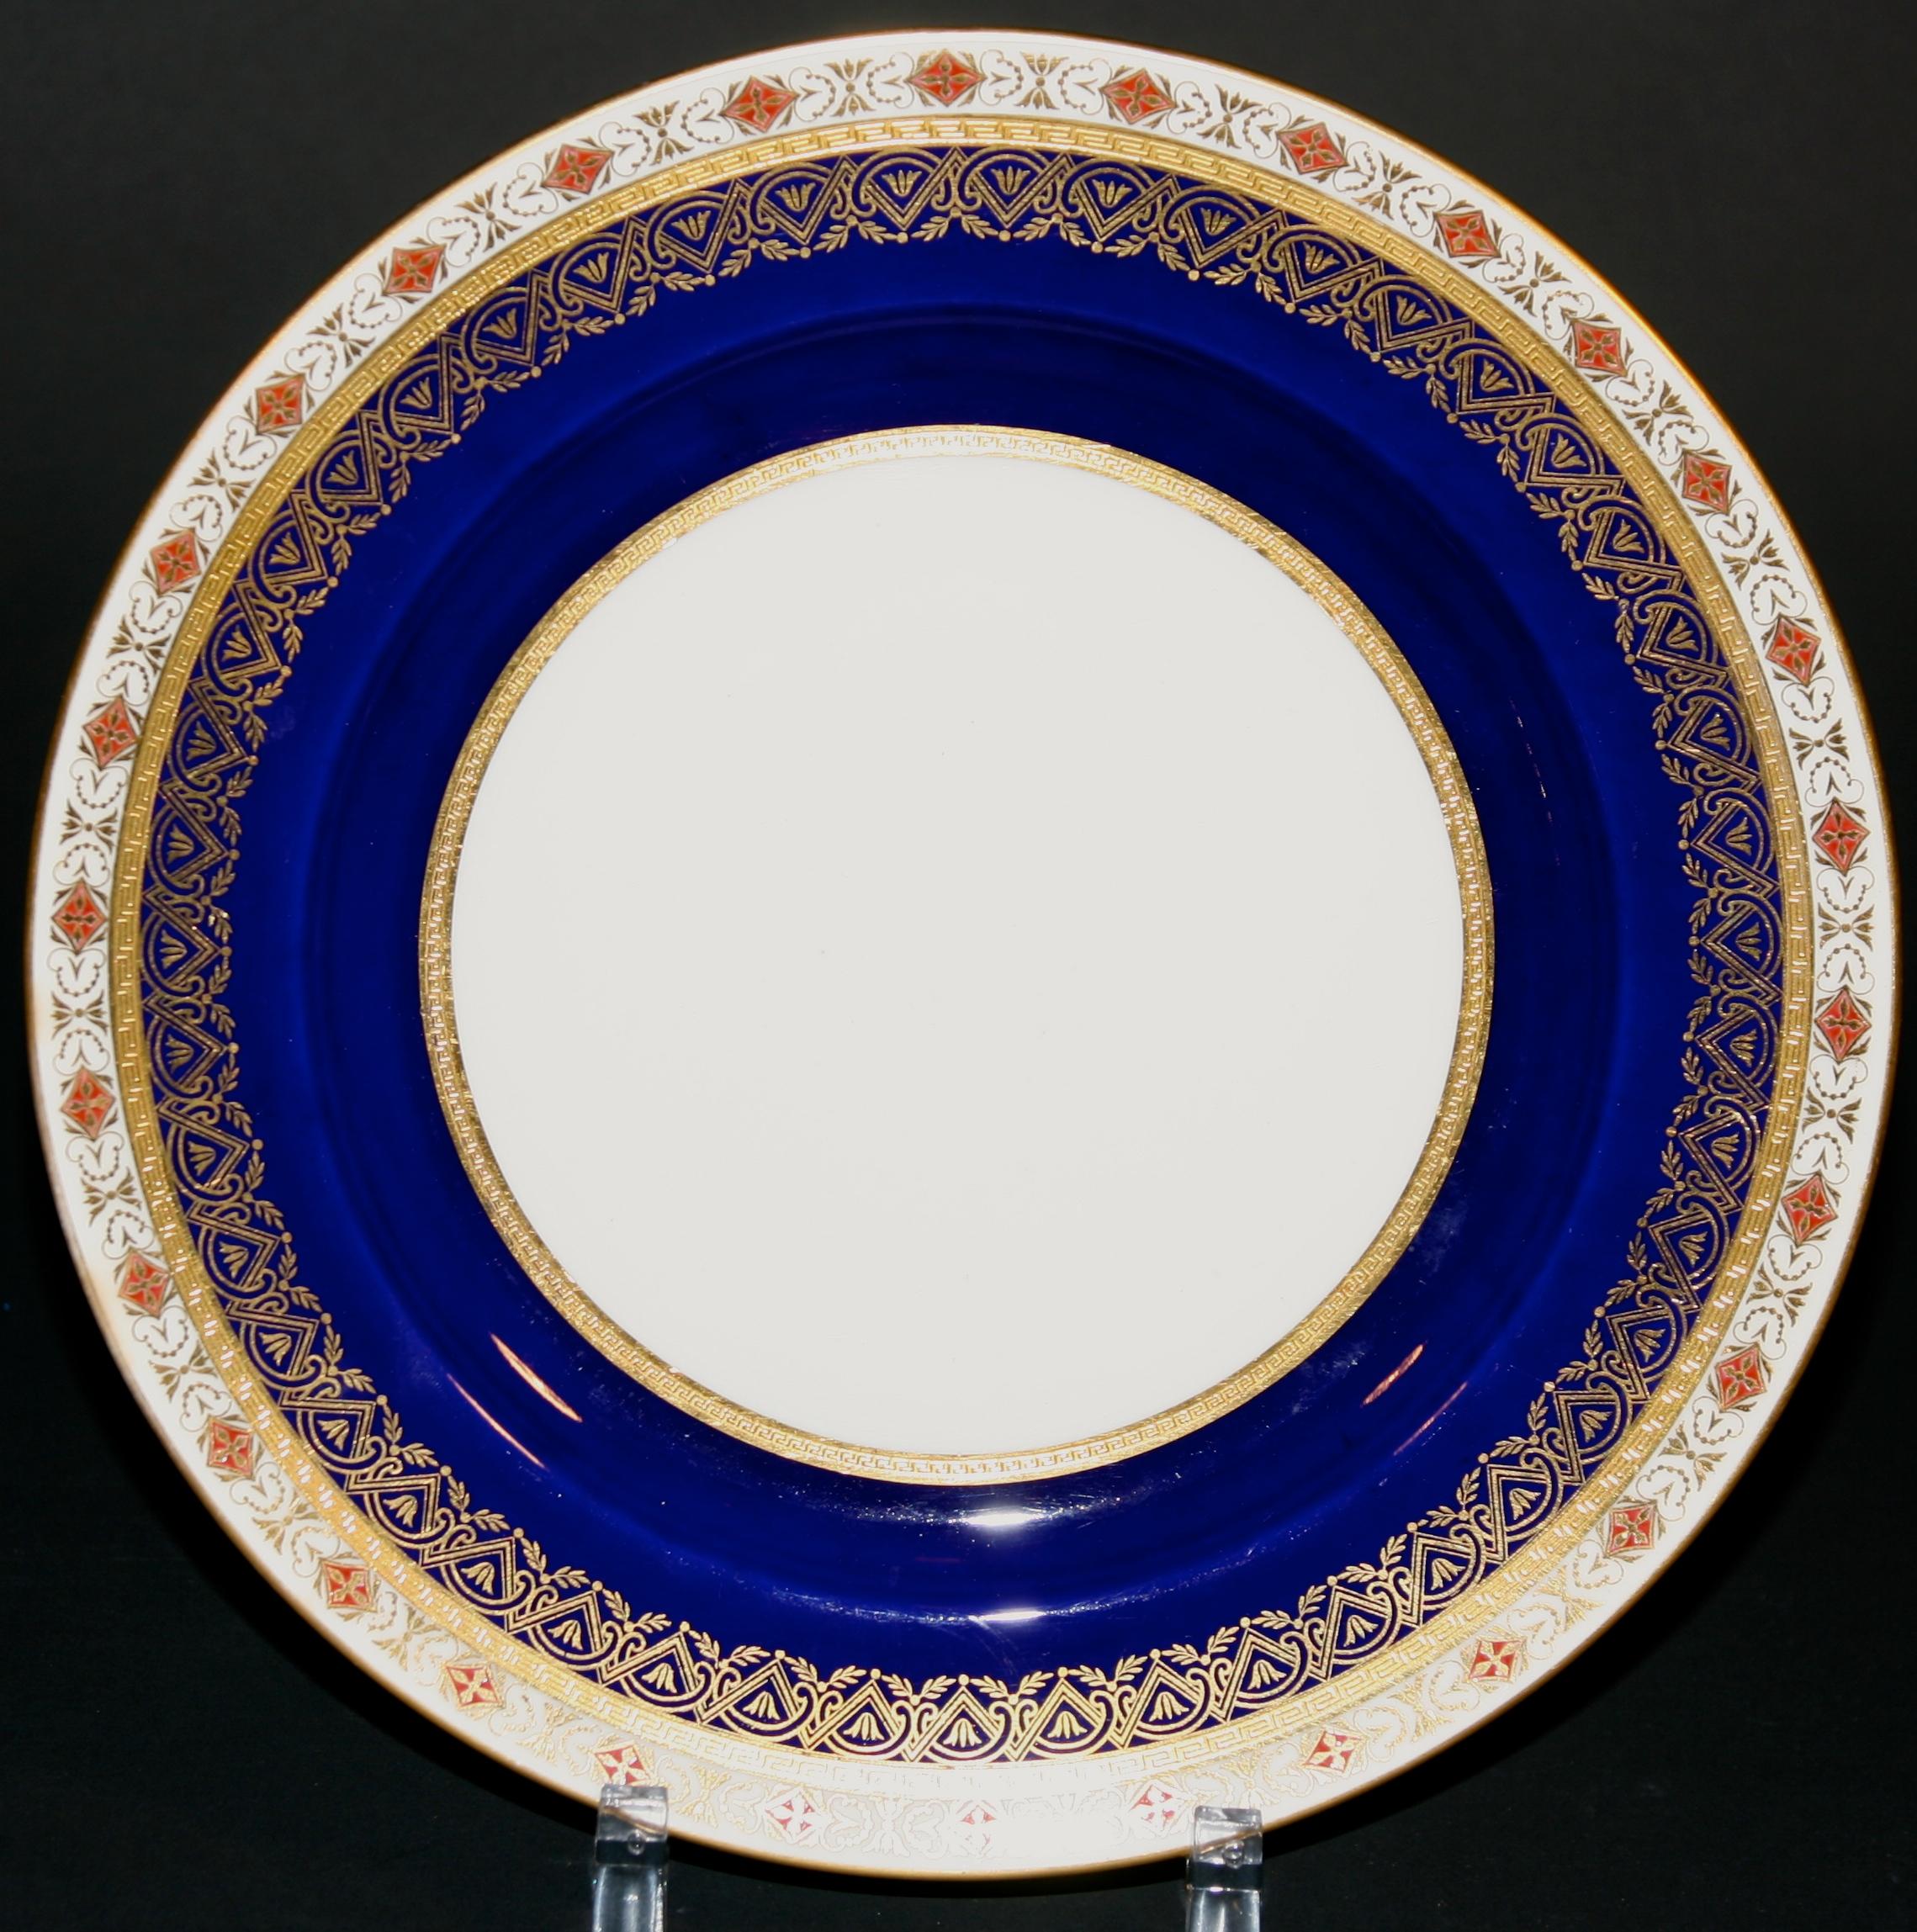 These 19th century plates from Minton, Stoke-on-Trent, England feature beautiful intricate bands containing white, rust, and 22-karat gold encrustation. They are a fine example of the intricate enamel designs Minton was capable of. Made for Gilman